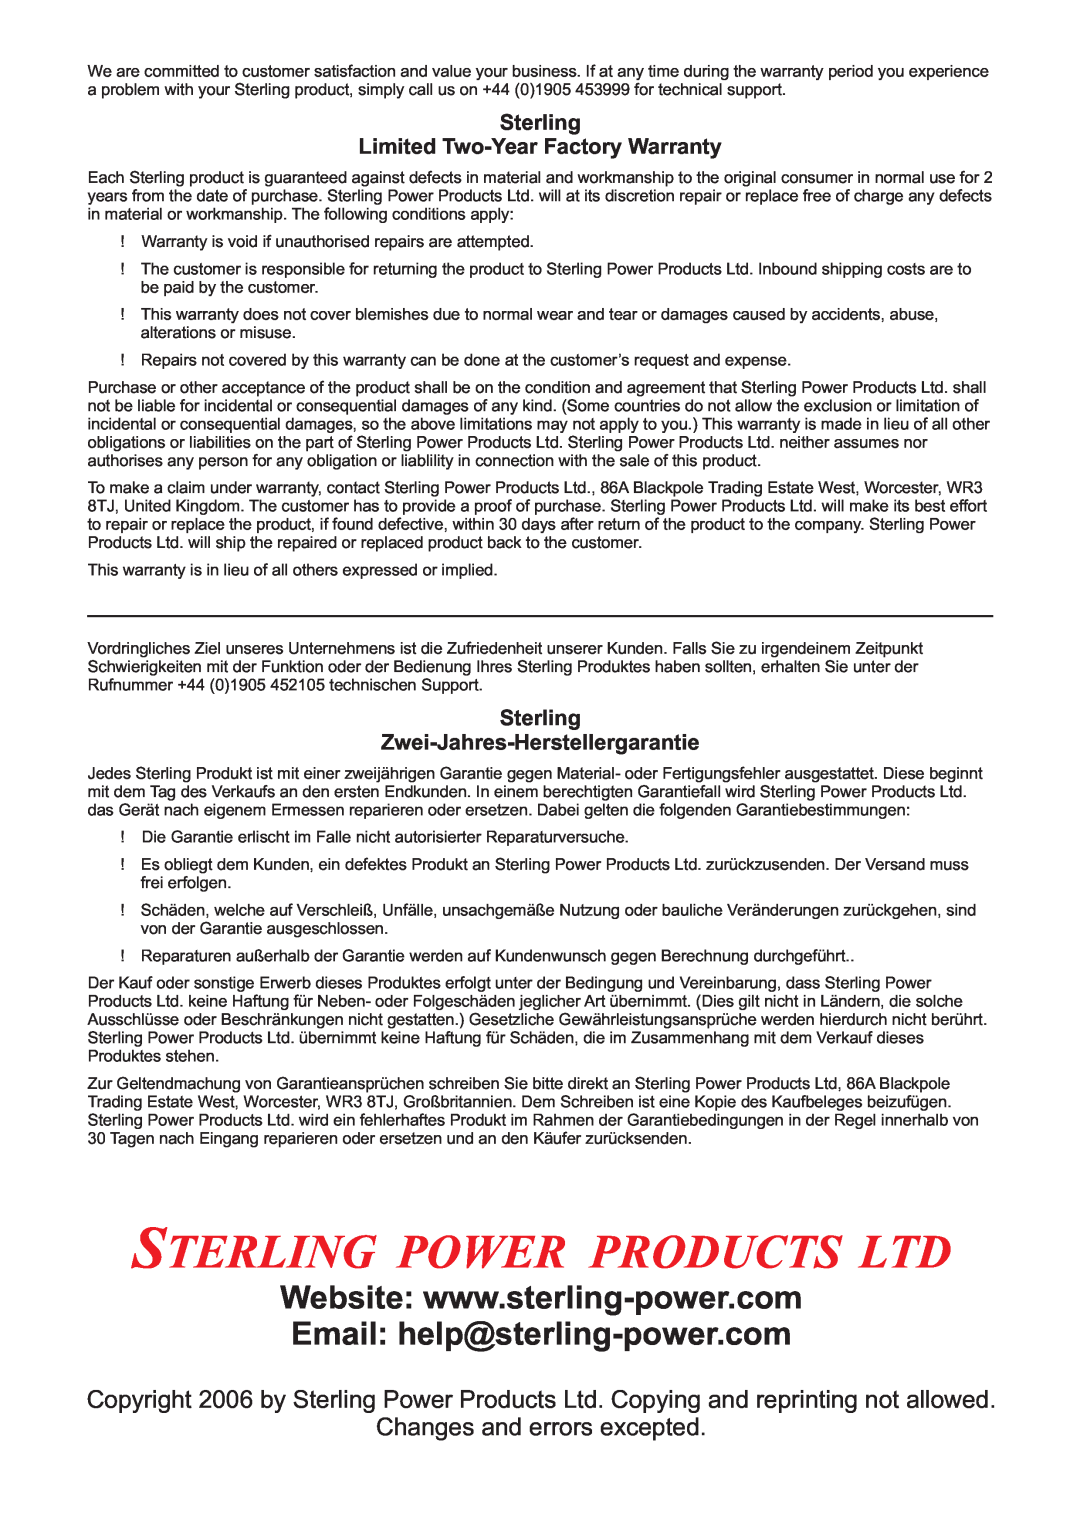 Sterling Power Products PT1210, PT1220 Sterling Limited Two-Year Factory Warranty, Sterling Zwei-Jahres-Herstellergarantie 